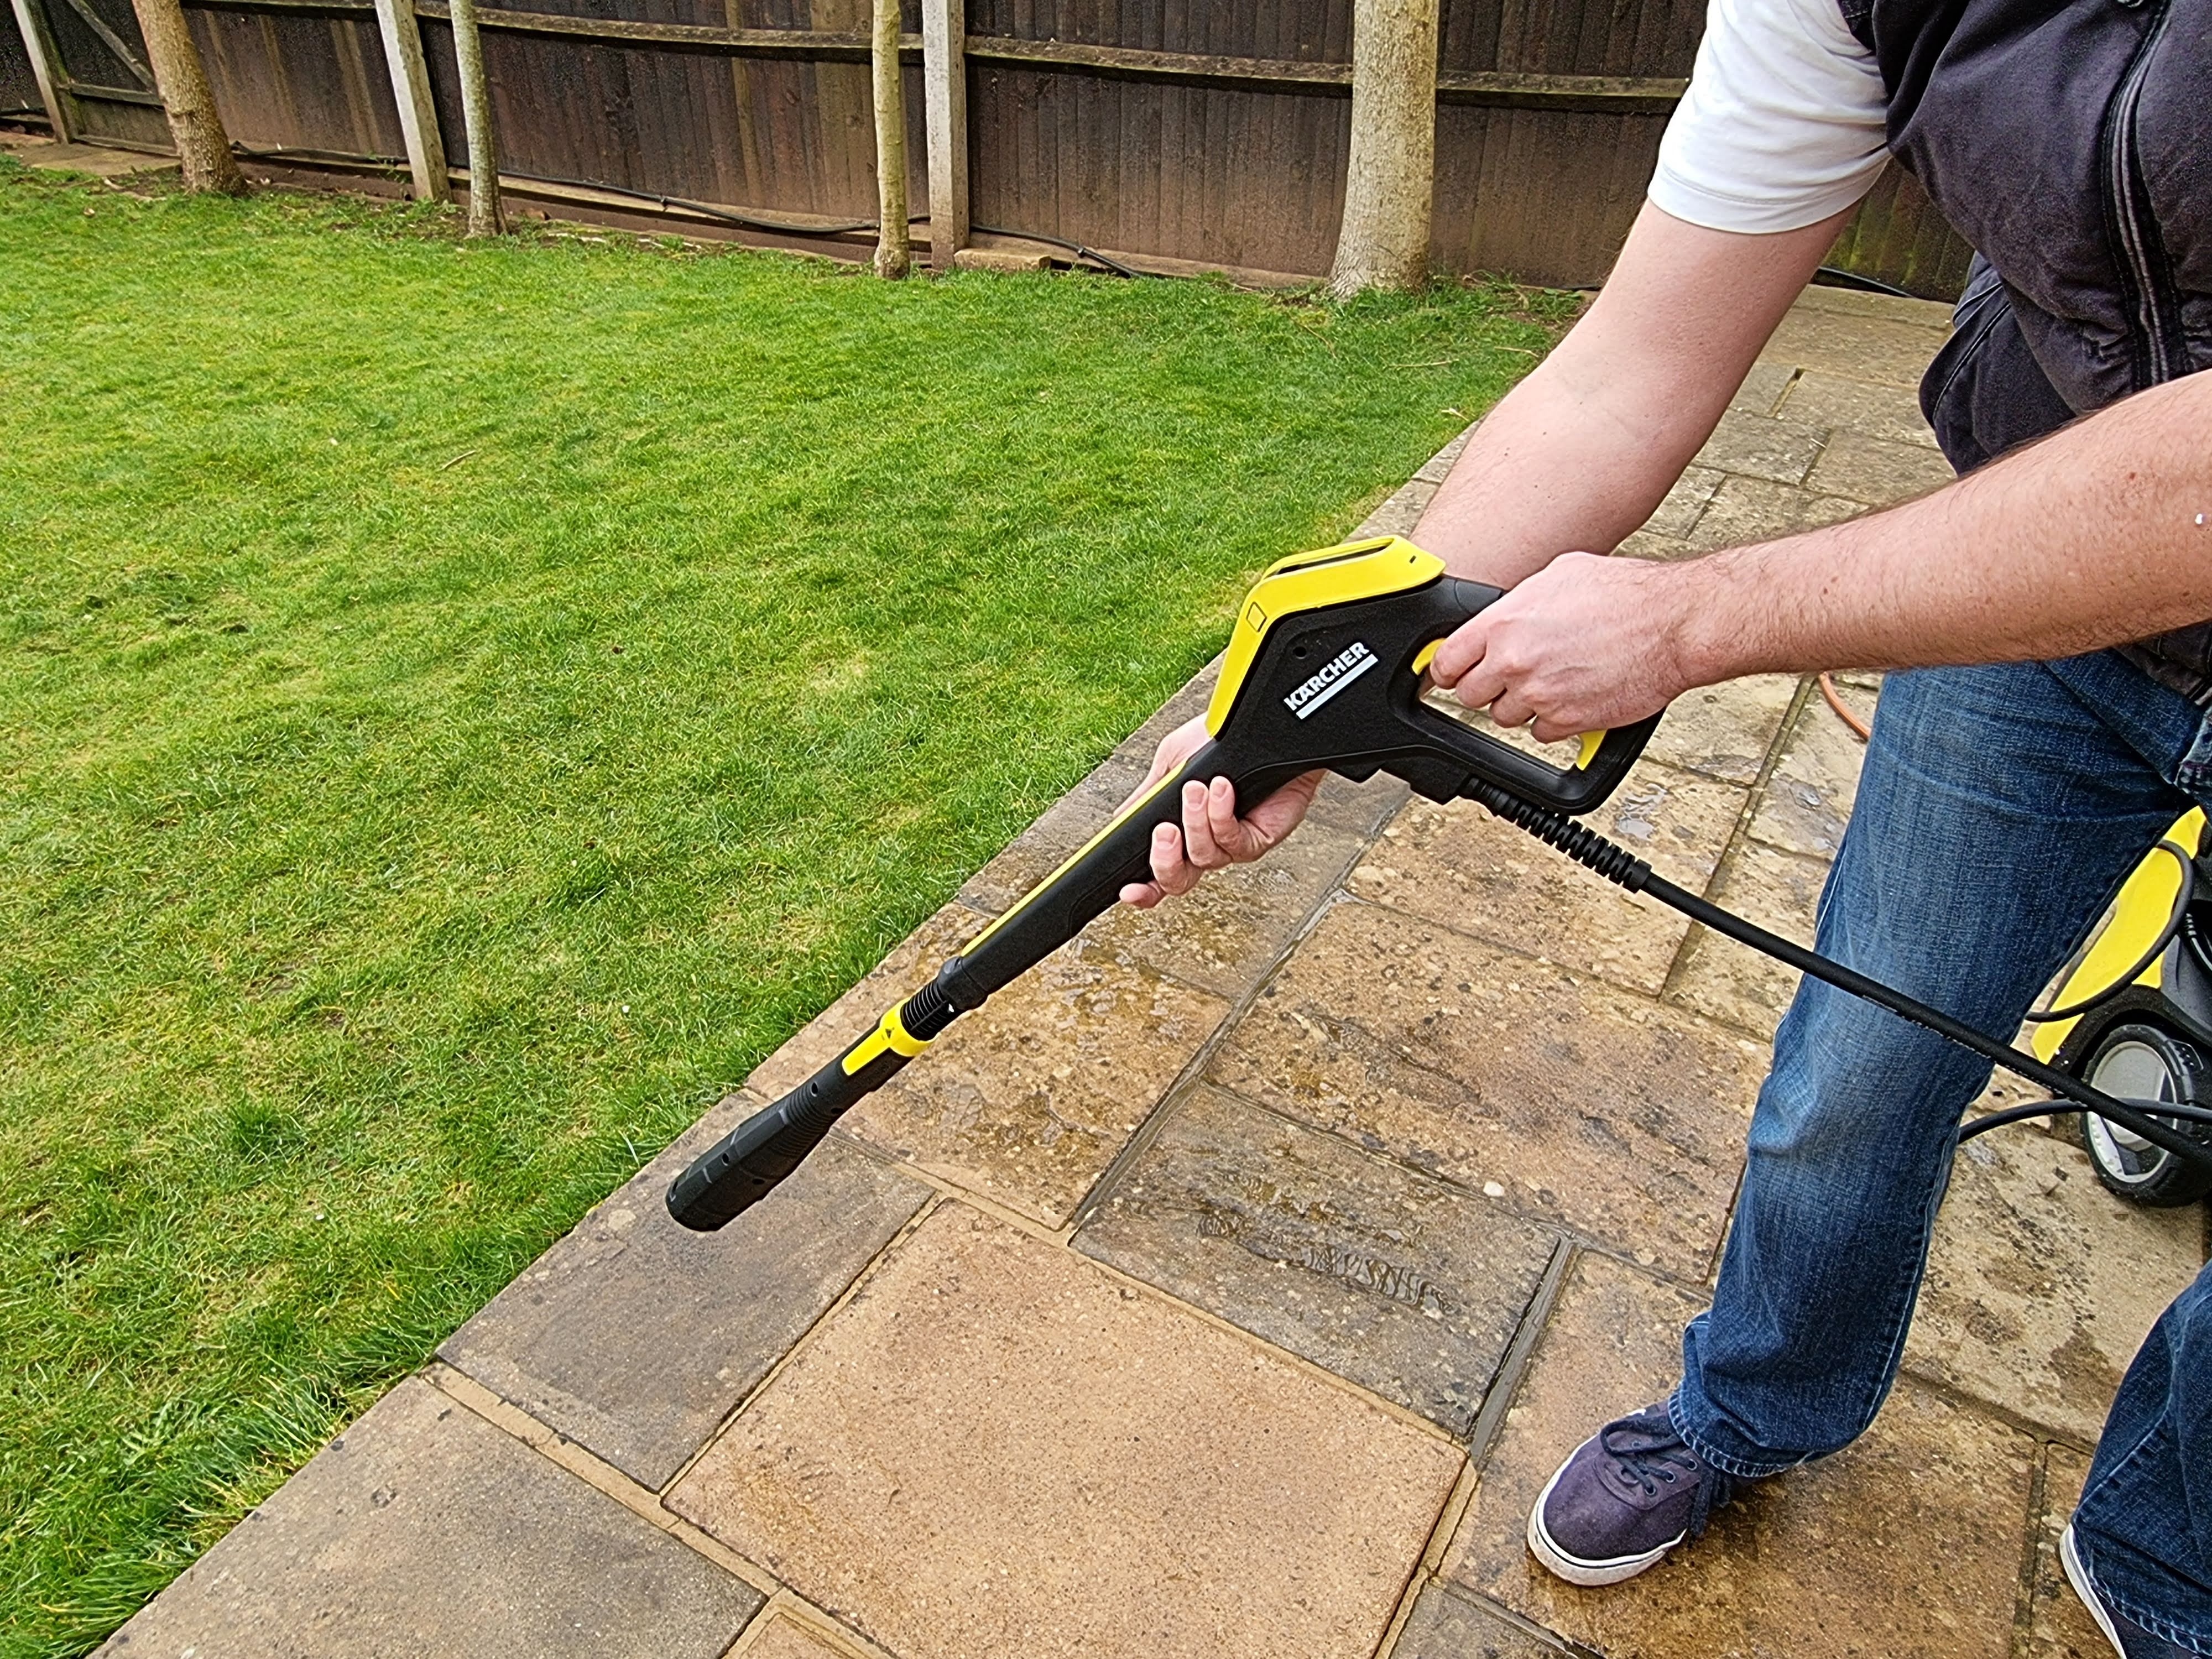 Karcher K7 Full Control Plus Pressure Washer Review - Zena's Suitcase